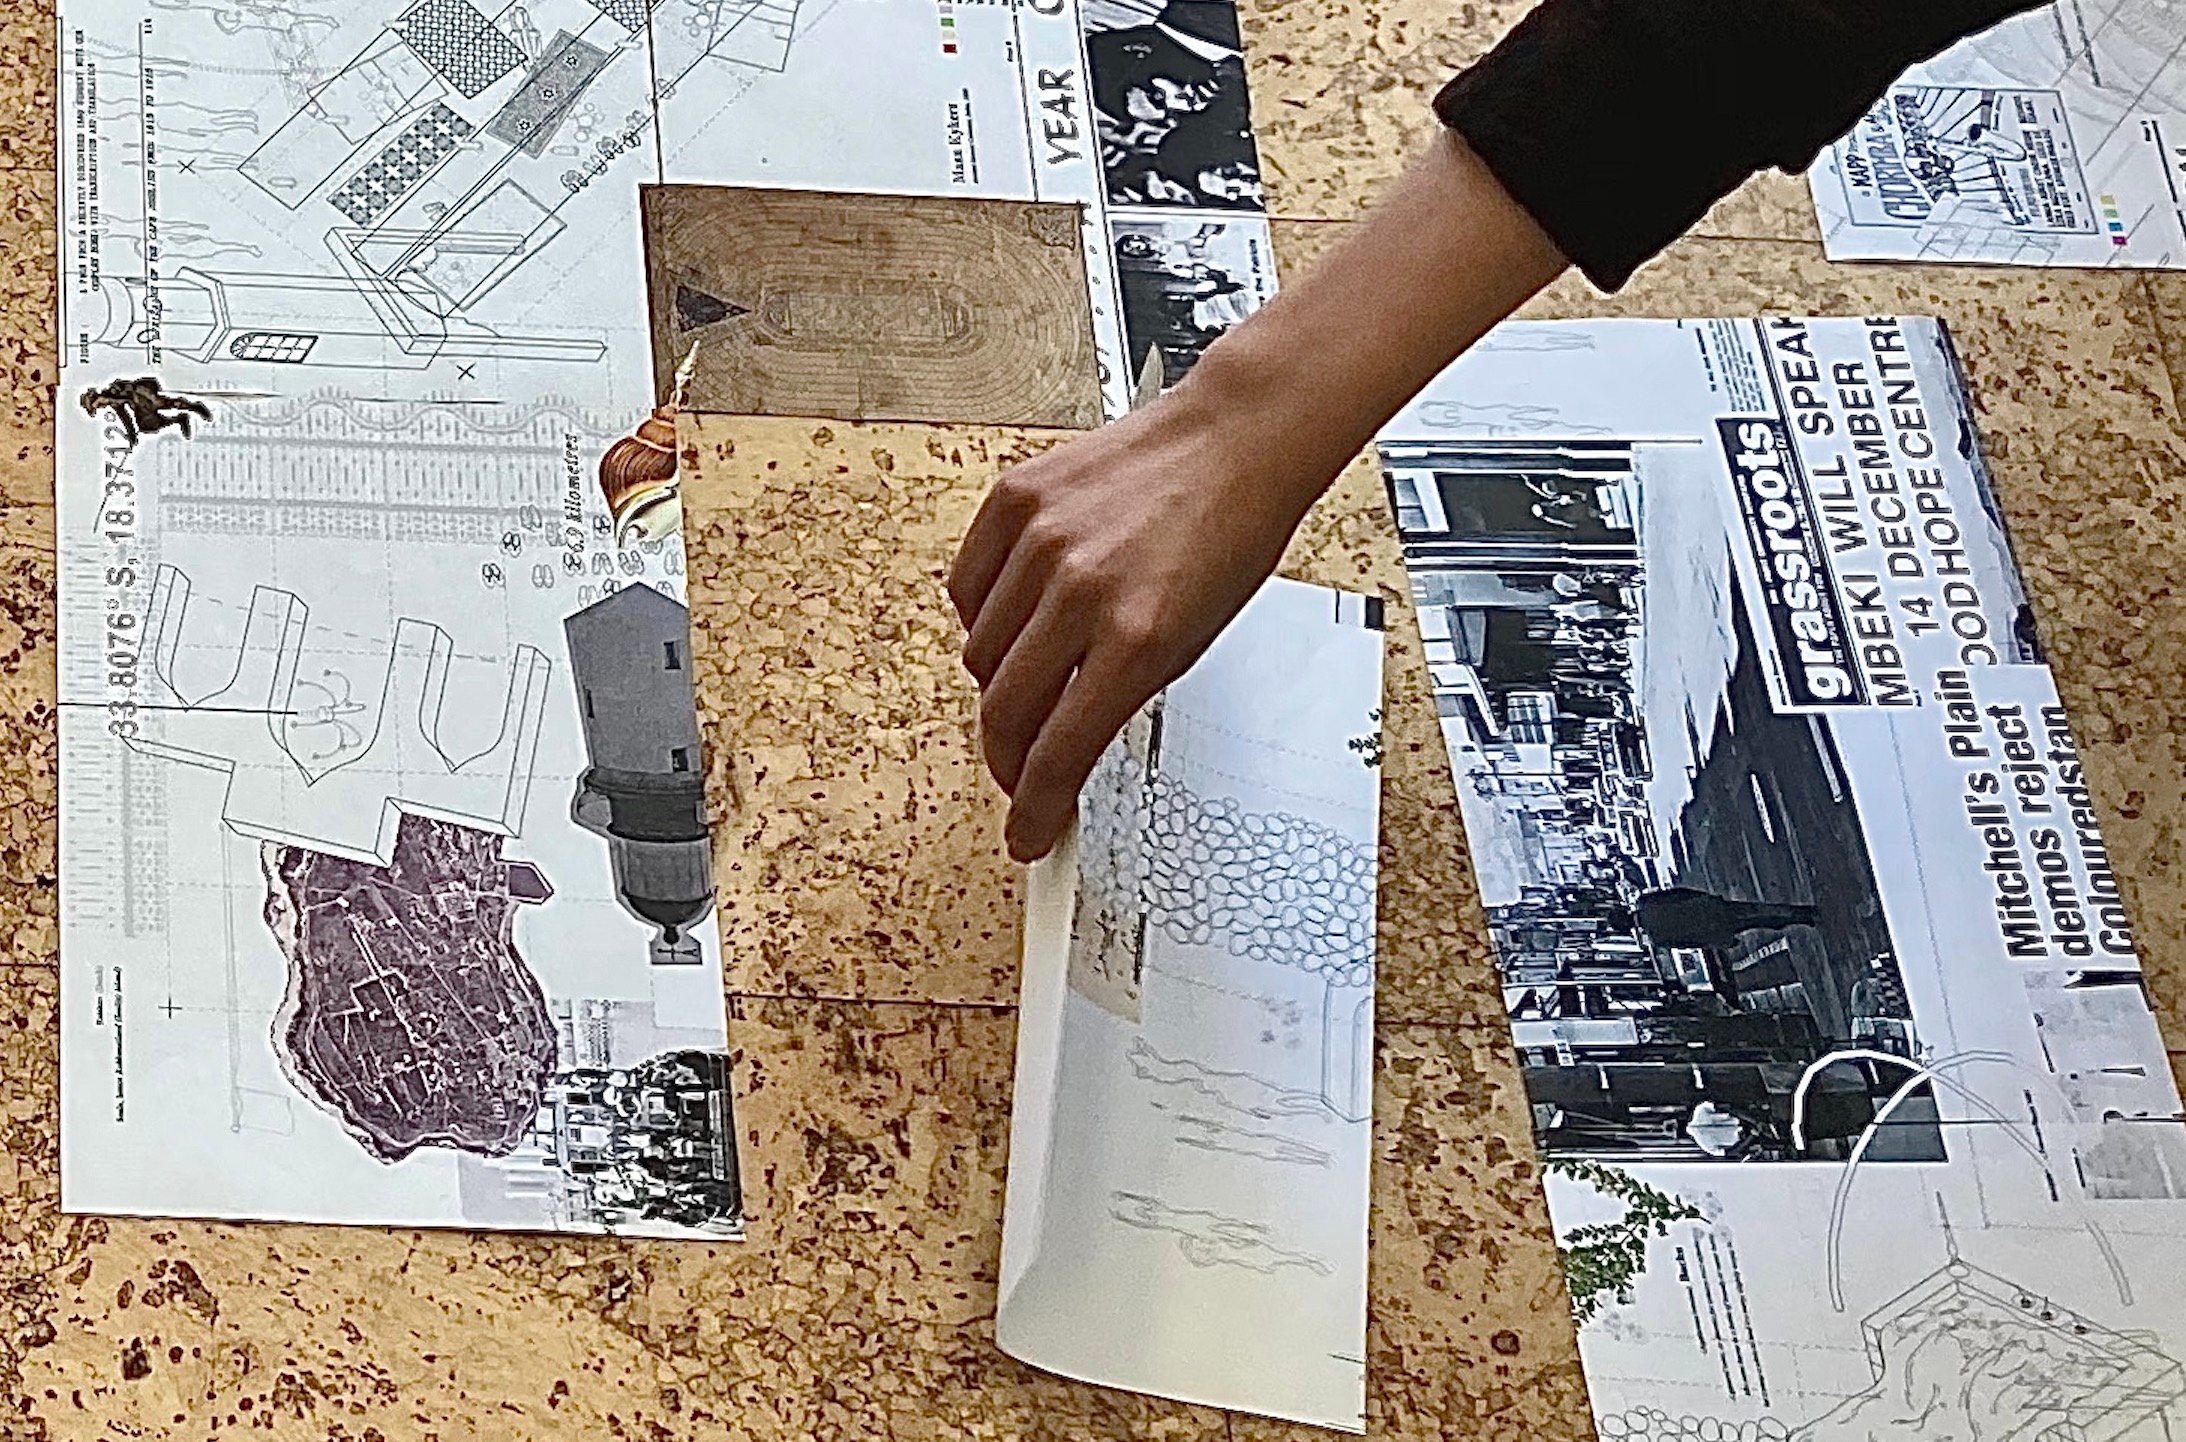 Process photograph from Sumayya Vally’s residency at A4. Sumayya arranges photocopies of archival material on a cork floor.
